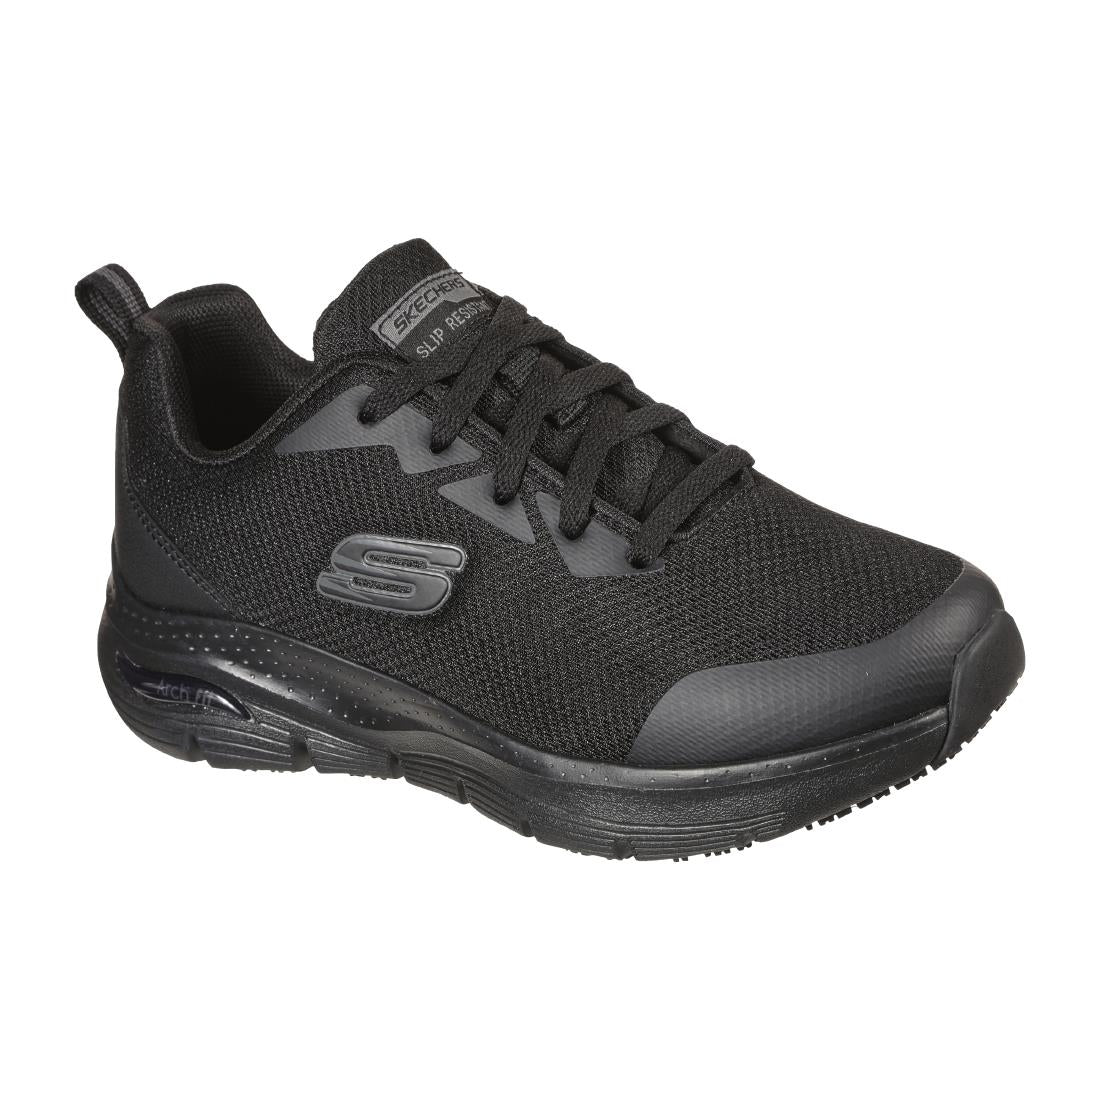 BB671-39 Skechers Womens Slip Resistant Arch Fit Trainer Size 39 JD Catering Equipment Solutions Ltd